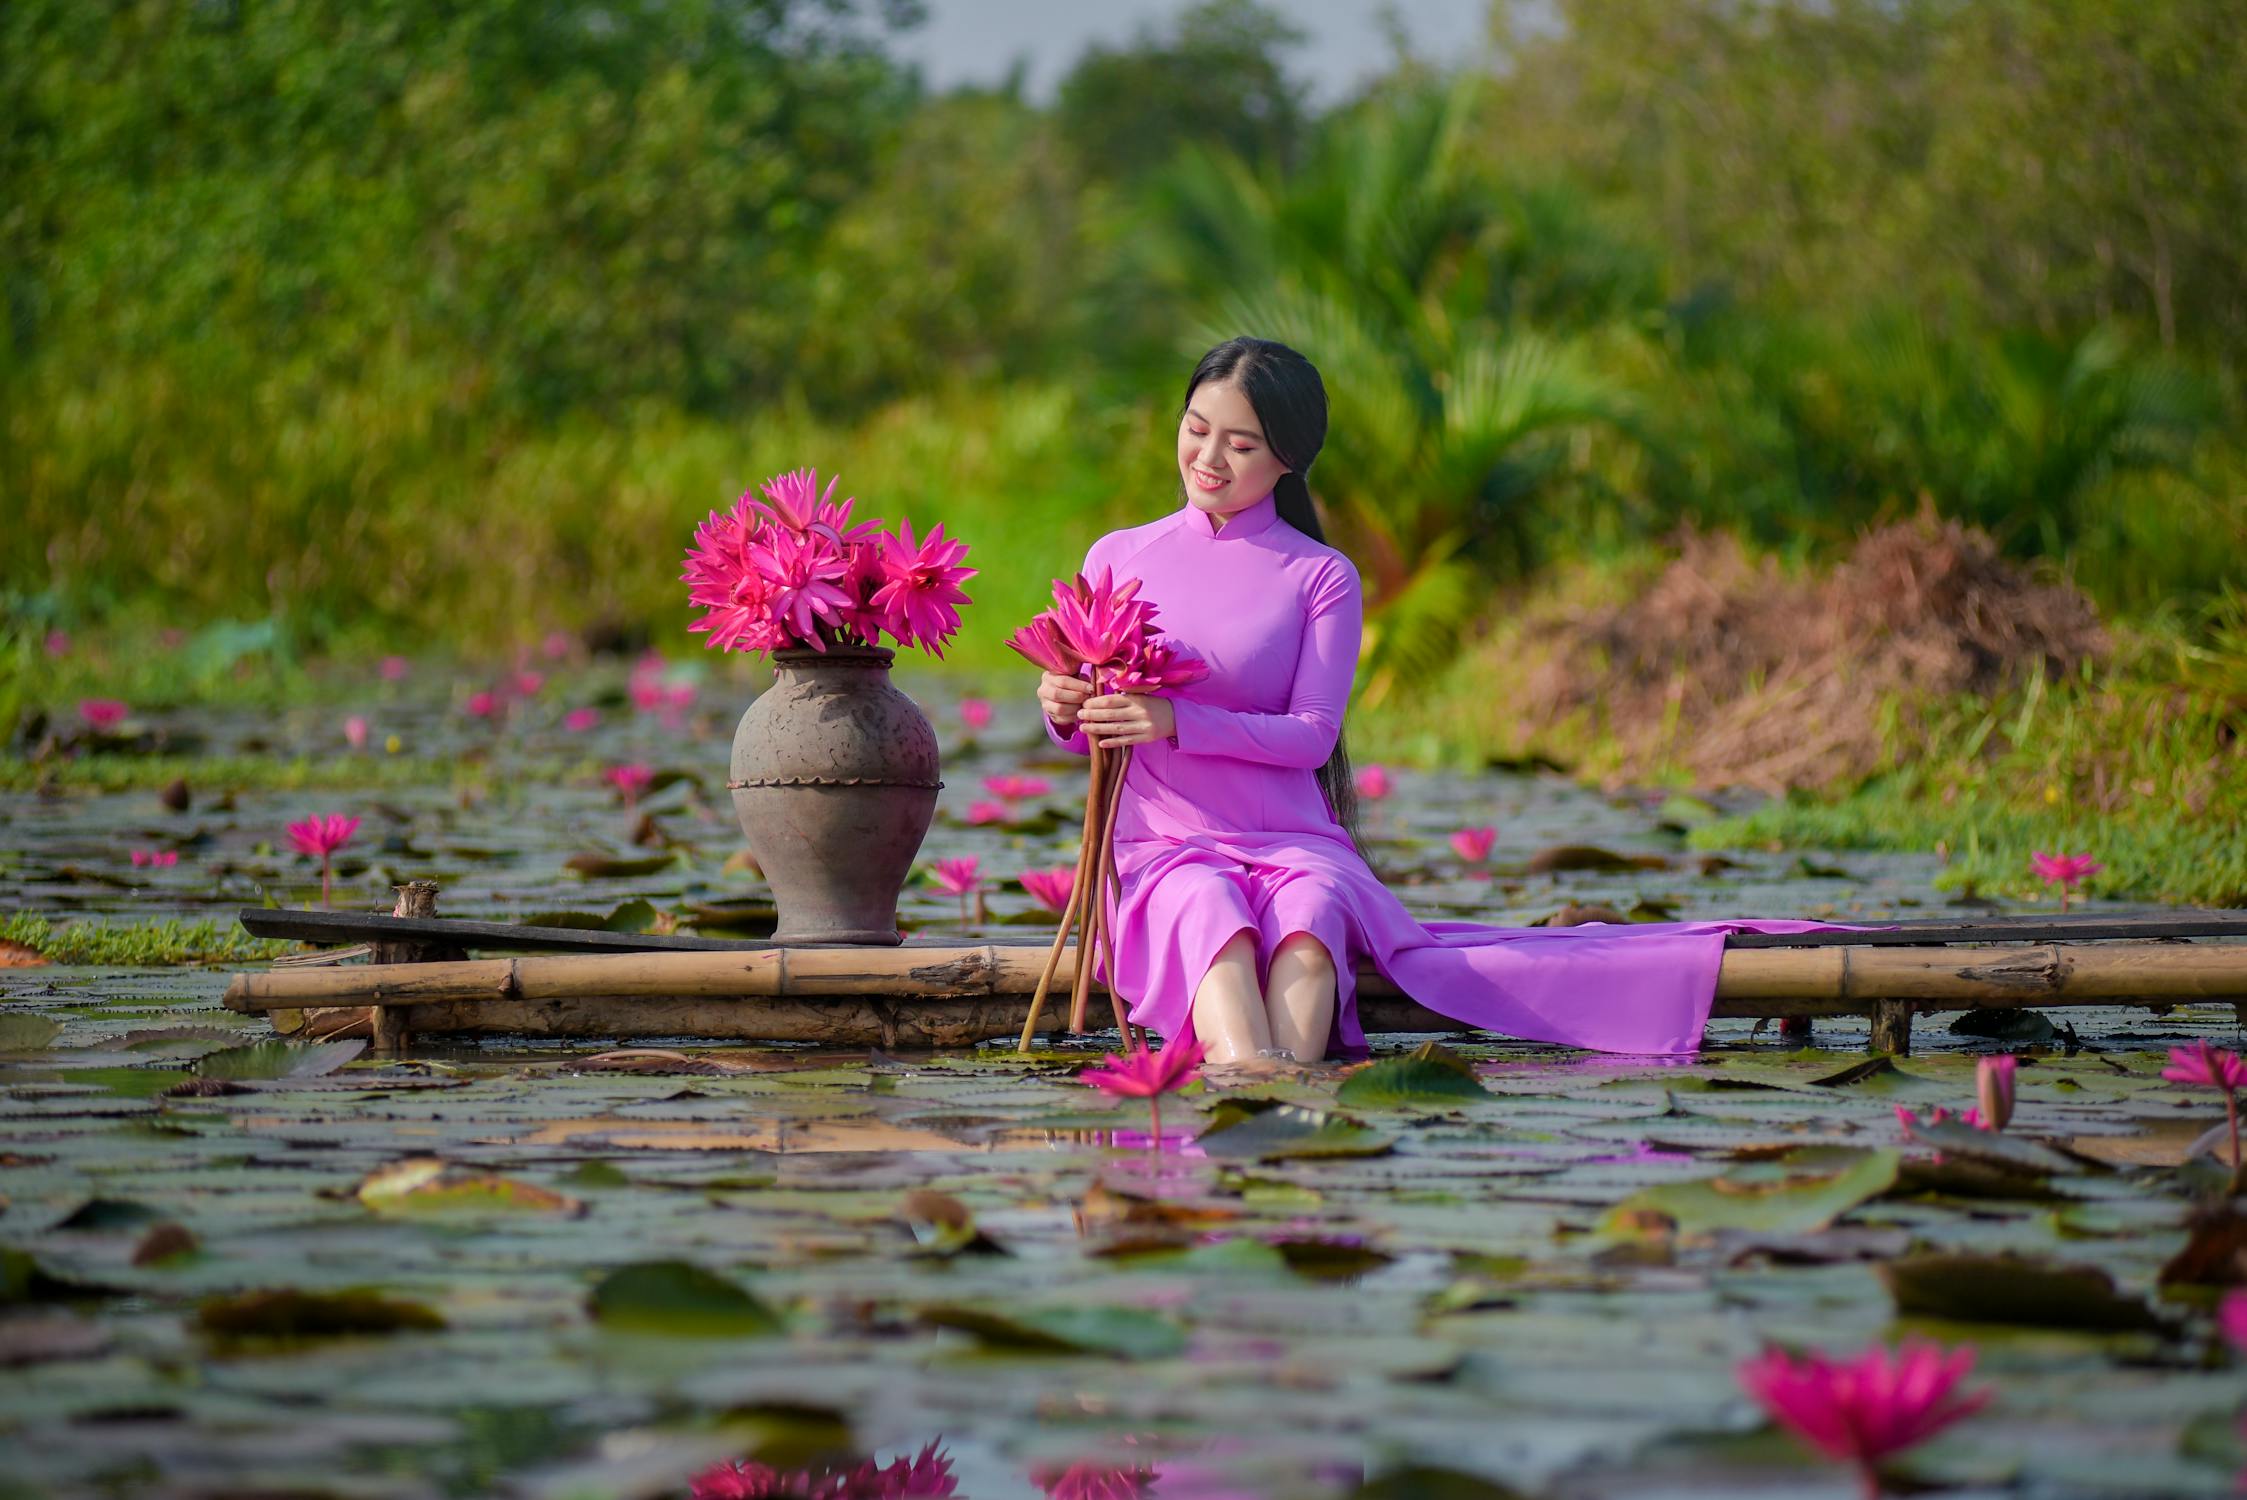 Korean Girl Photo by Phát Trương from Pexels: https://www.pexels.com/photo/a-woman-in-pink-dress-sitting-near-the-lake-while-holding-pink-flowers-5521412/